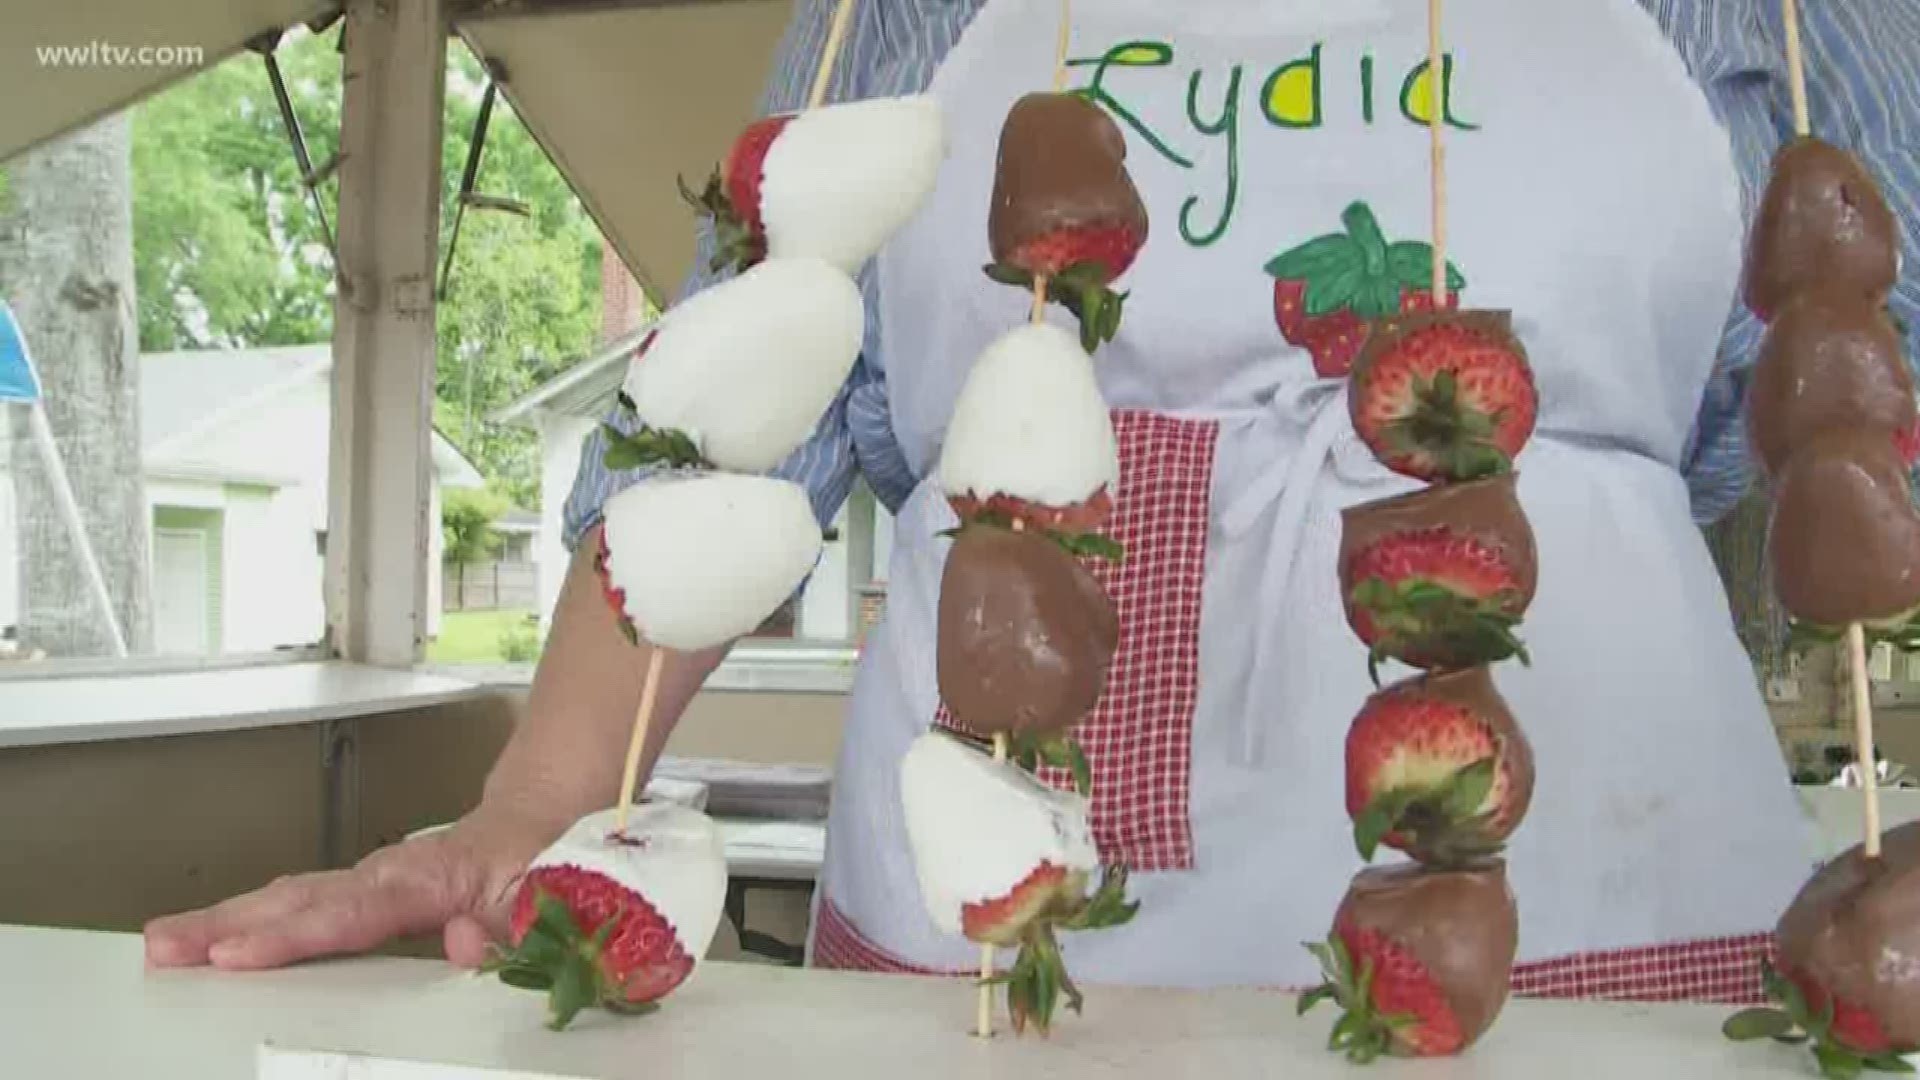 The festival means a lot to the people of Ponchatoula, especially strawberry farmers.